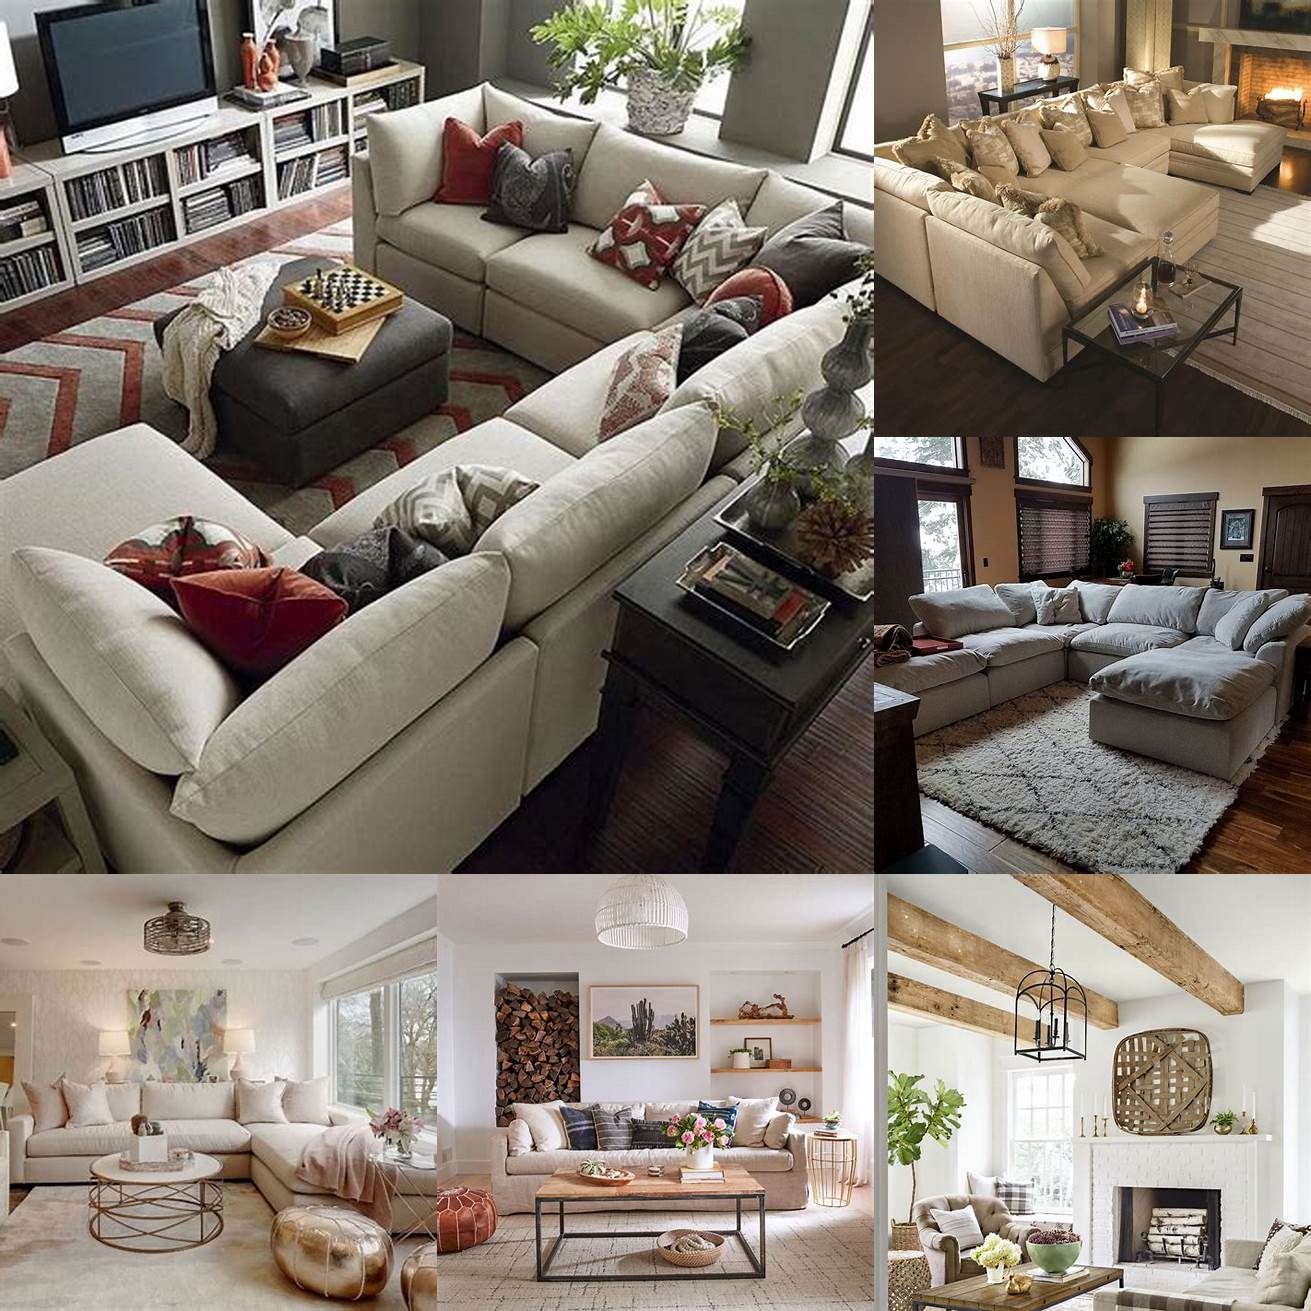 Image 2 A cozy beige modern sectional sofa in a rustic living room